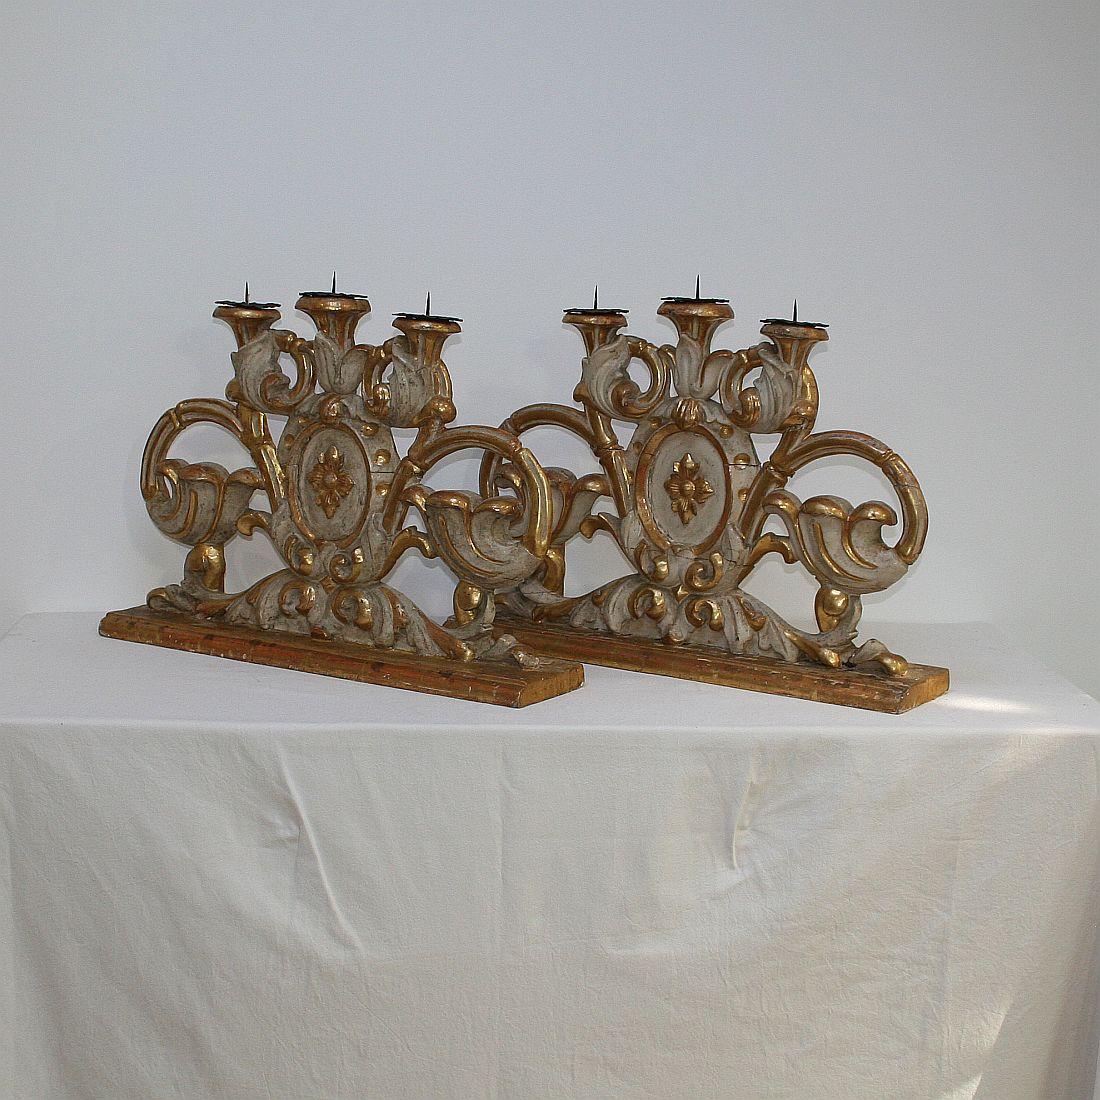 Hand-Carved Pair of 18th Century Italian Baroque Carved Wooden Candleholders/Candlesticks